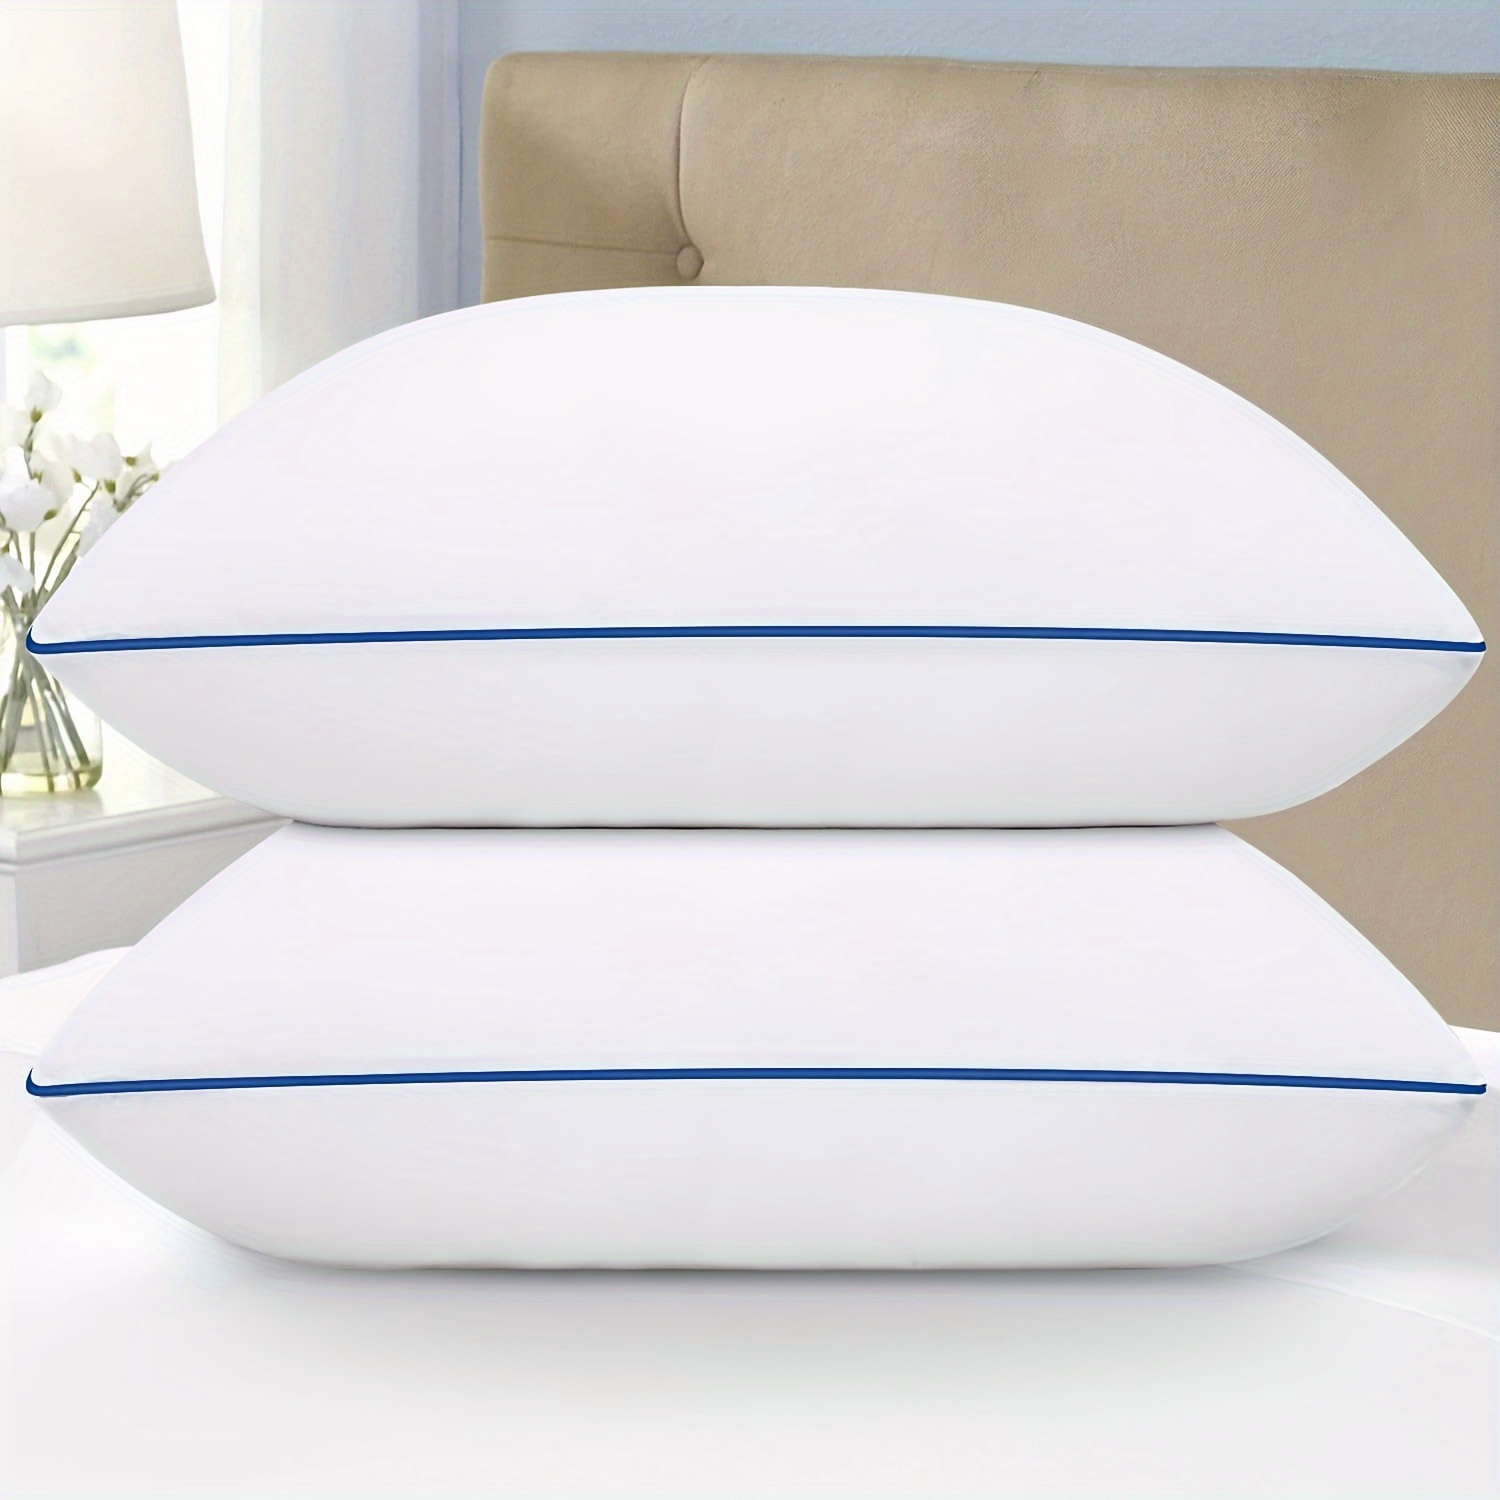 

Bed Pillows For Sleeping, 2 Pack, Cooling Hotel Quality Quality With Premium Soft Down Alternative Fill For Back, Stomach Or Side Sleepers